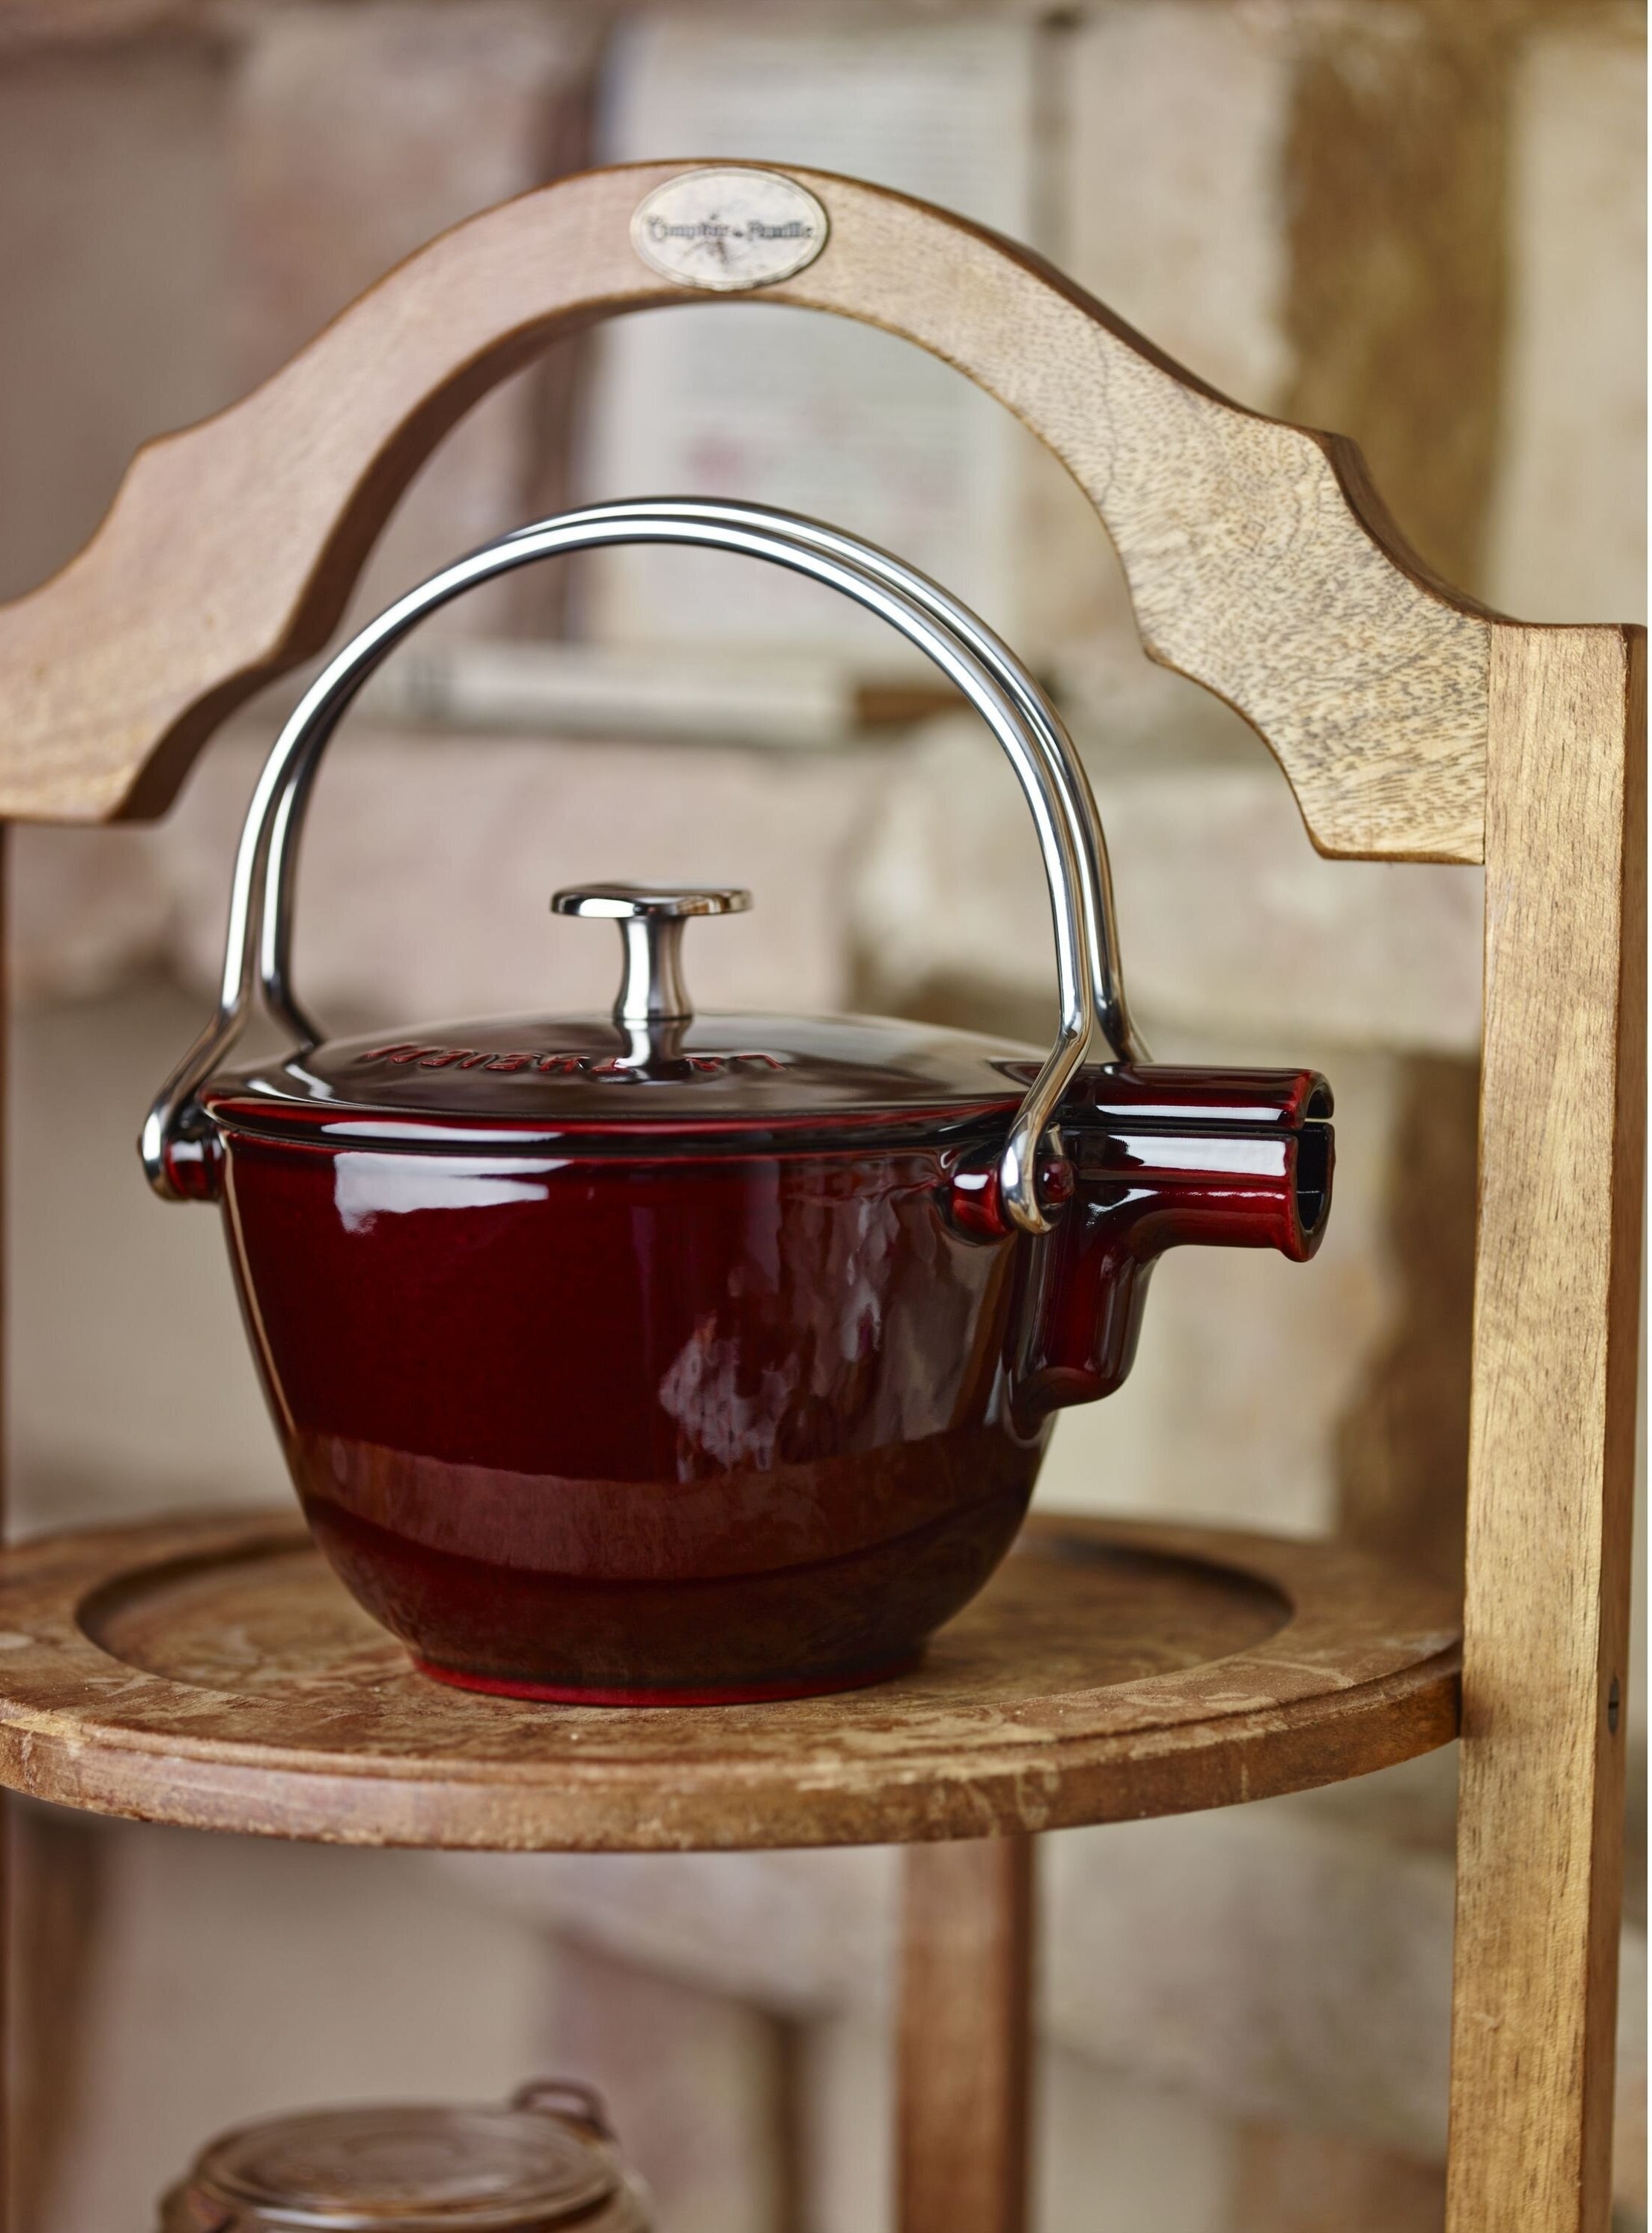 the cast-iron kettle with a handle